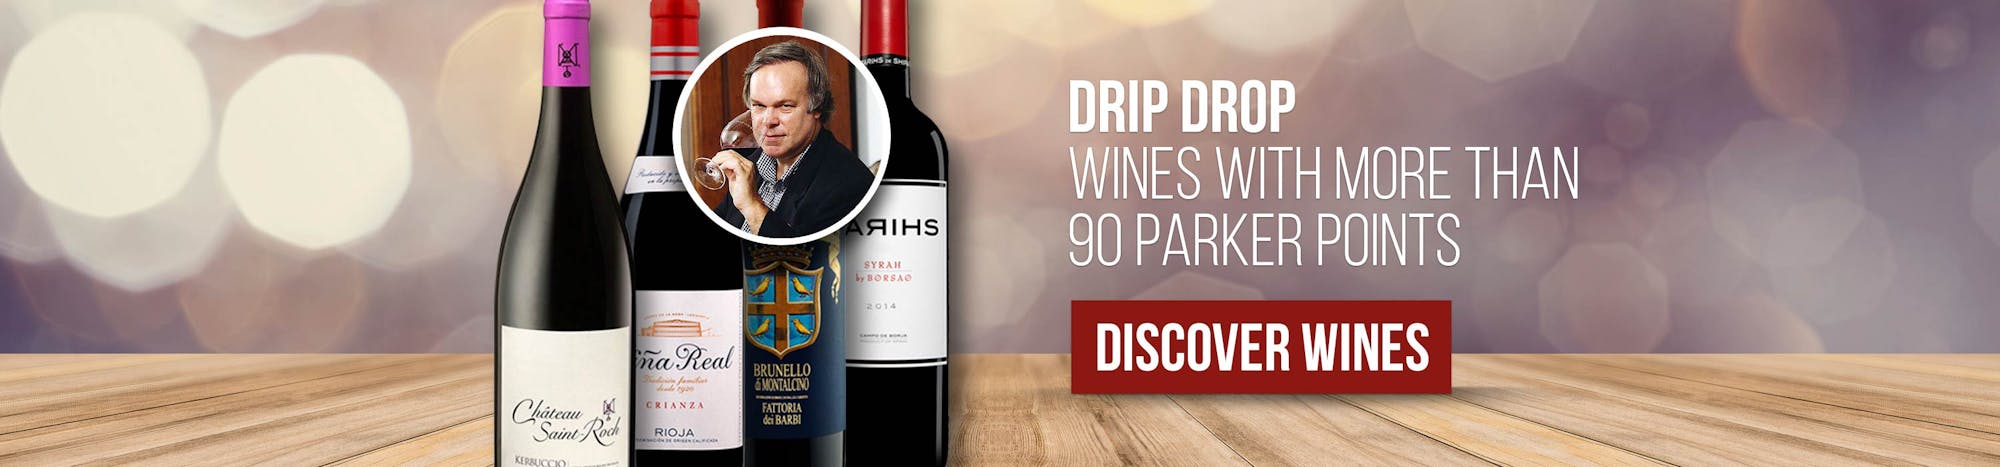 Drip Drop – Wines with 90+ Parker Points